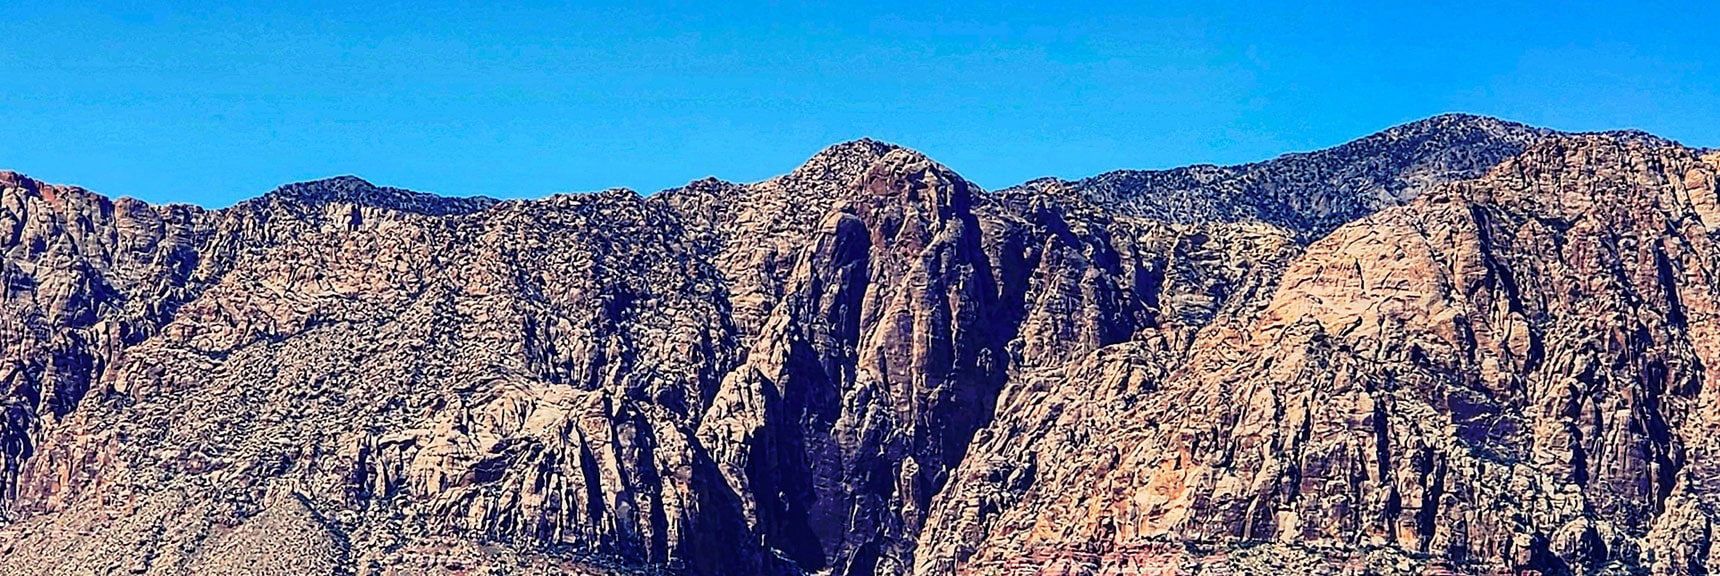 Next is the Highly Technical But Popular Black Velvet Peak. | Blue Diamond Hill Southern Ridgelines | Red Rock Canyon, Nevada